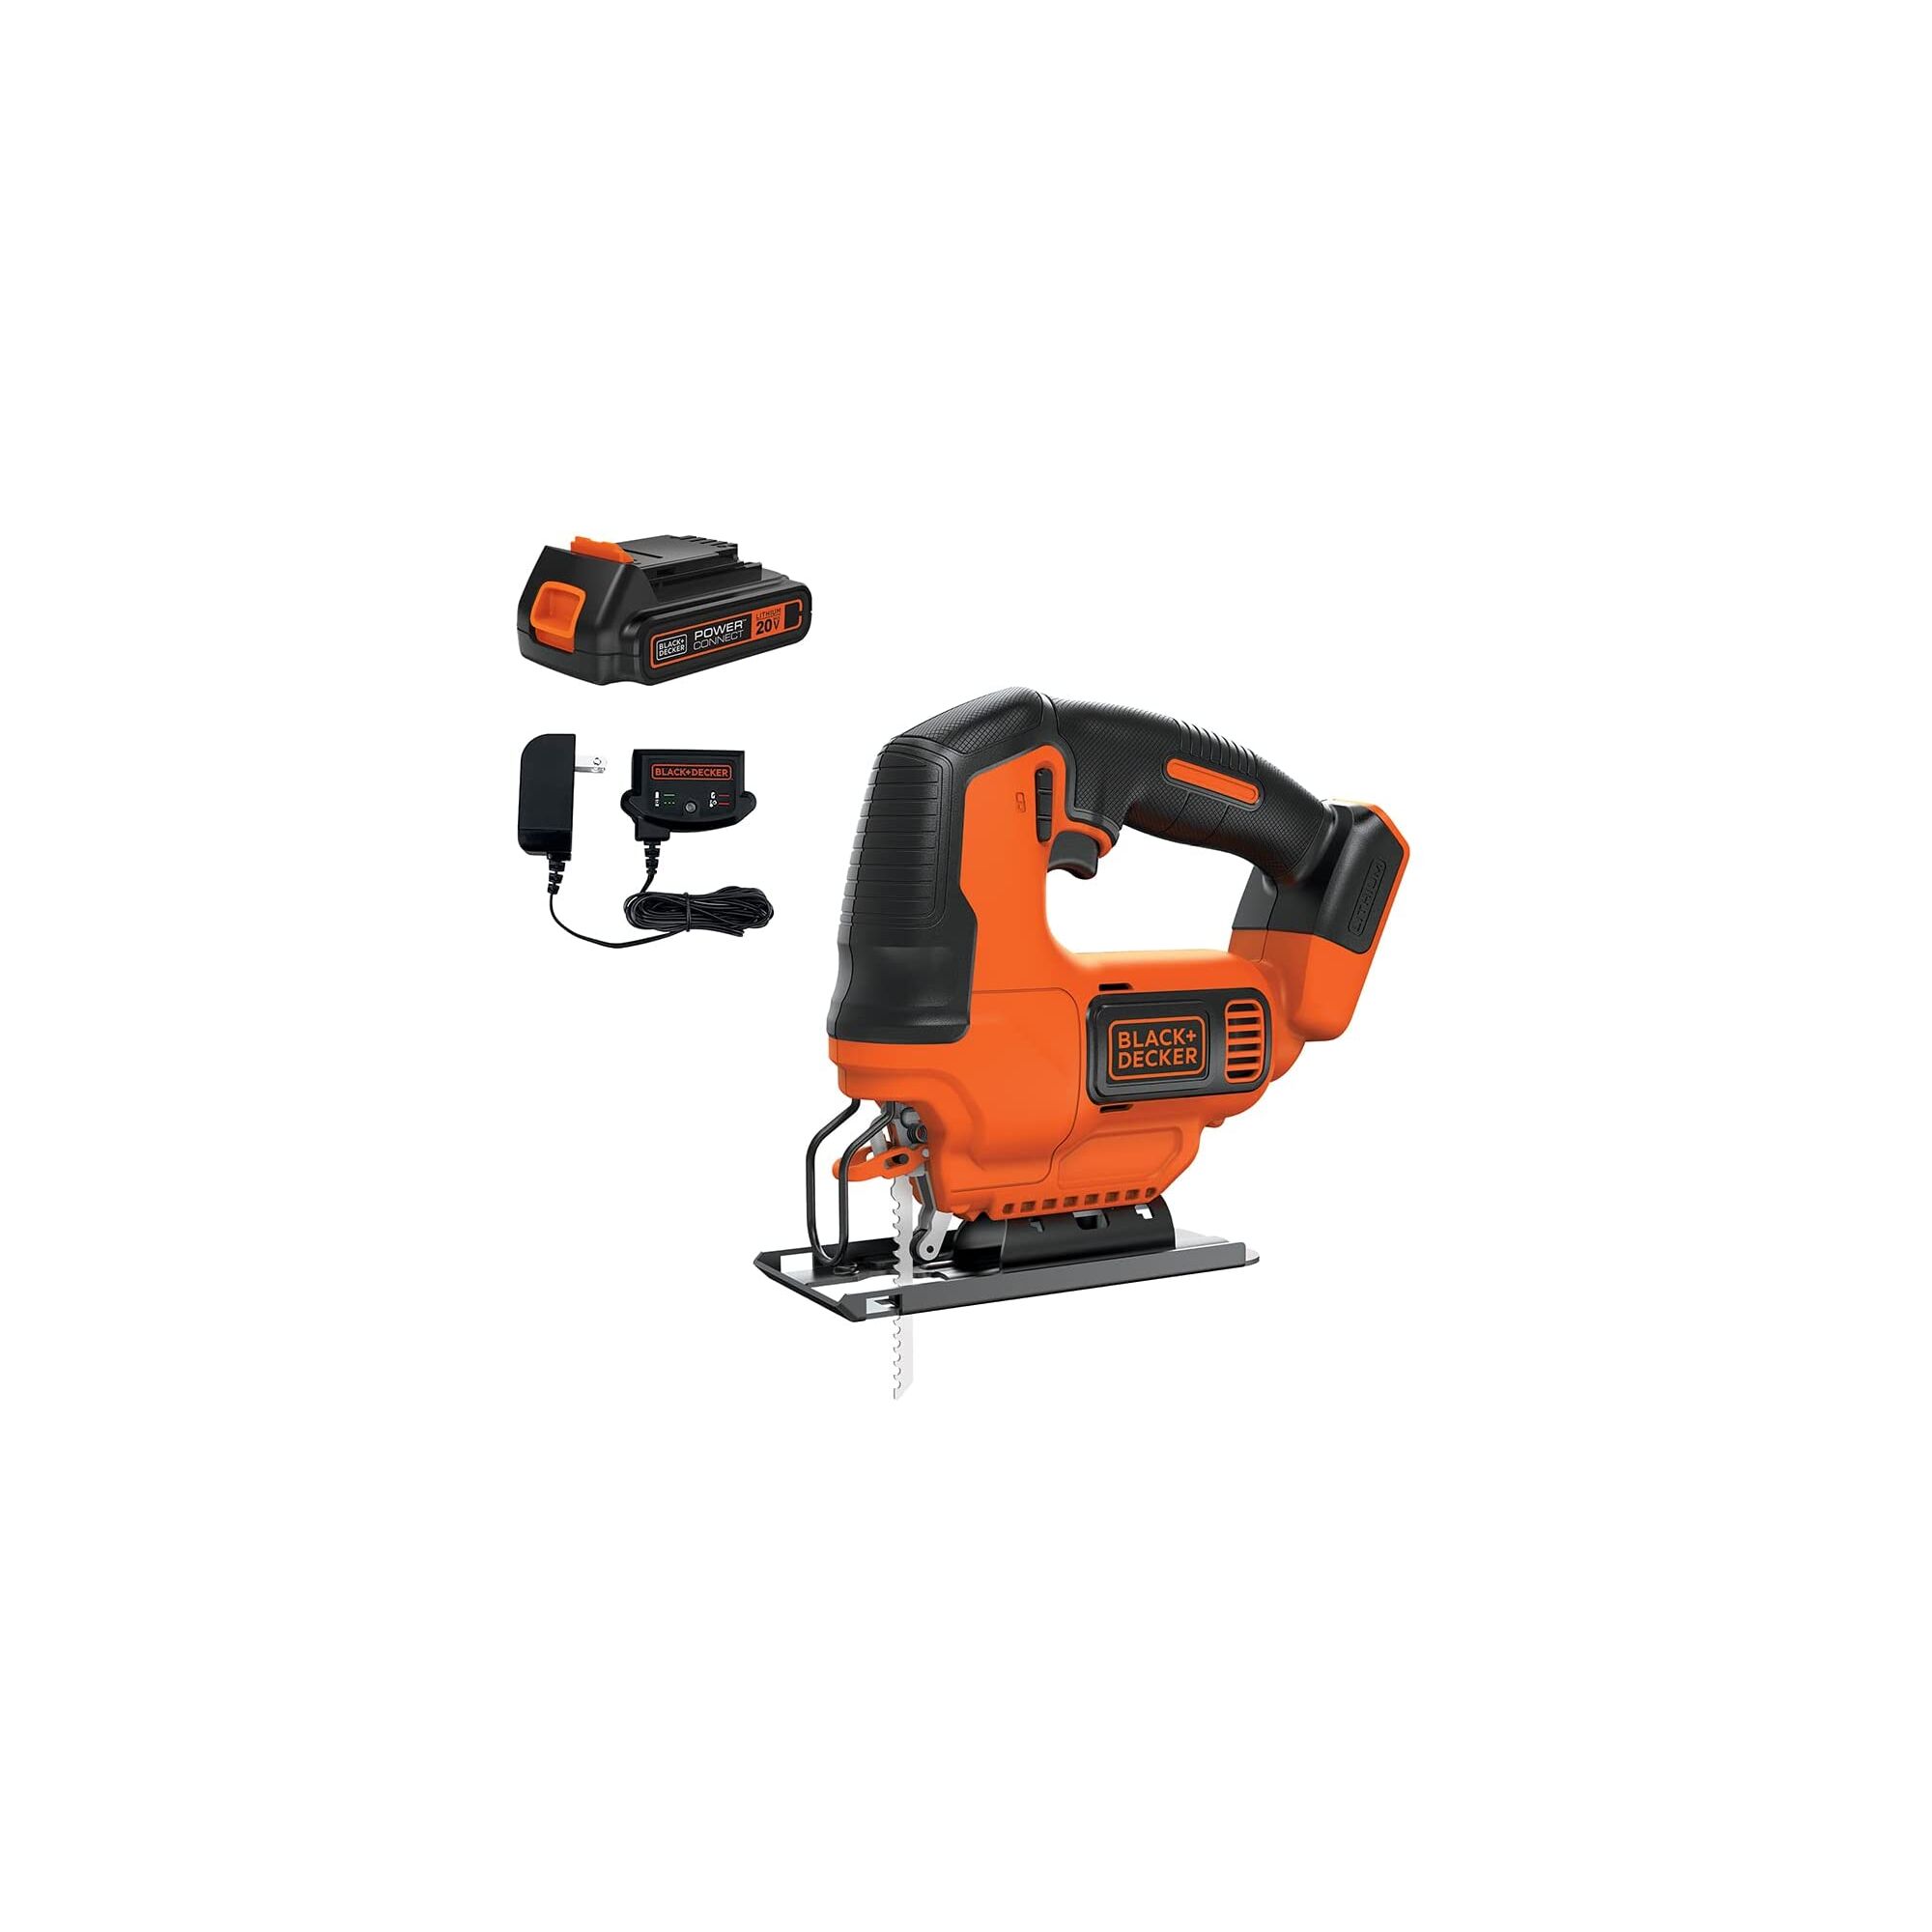 Profile of 20 volt cordless jigsaw with 20 volt lithium battery and charger.